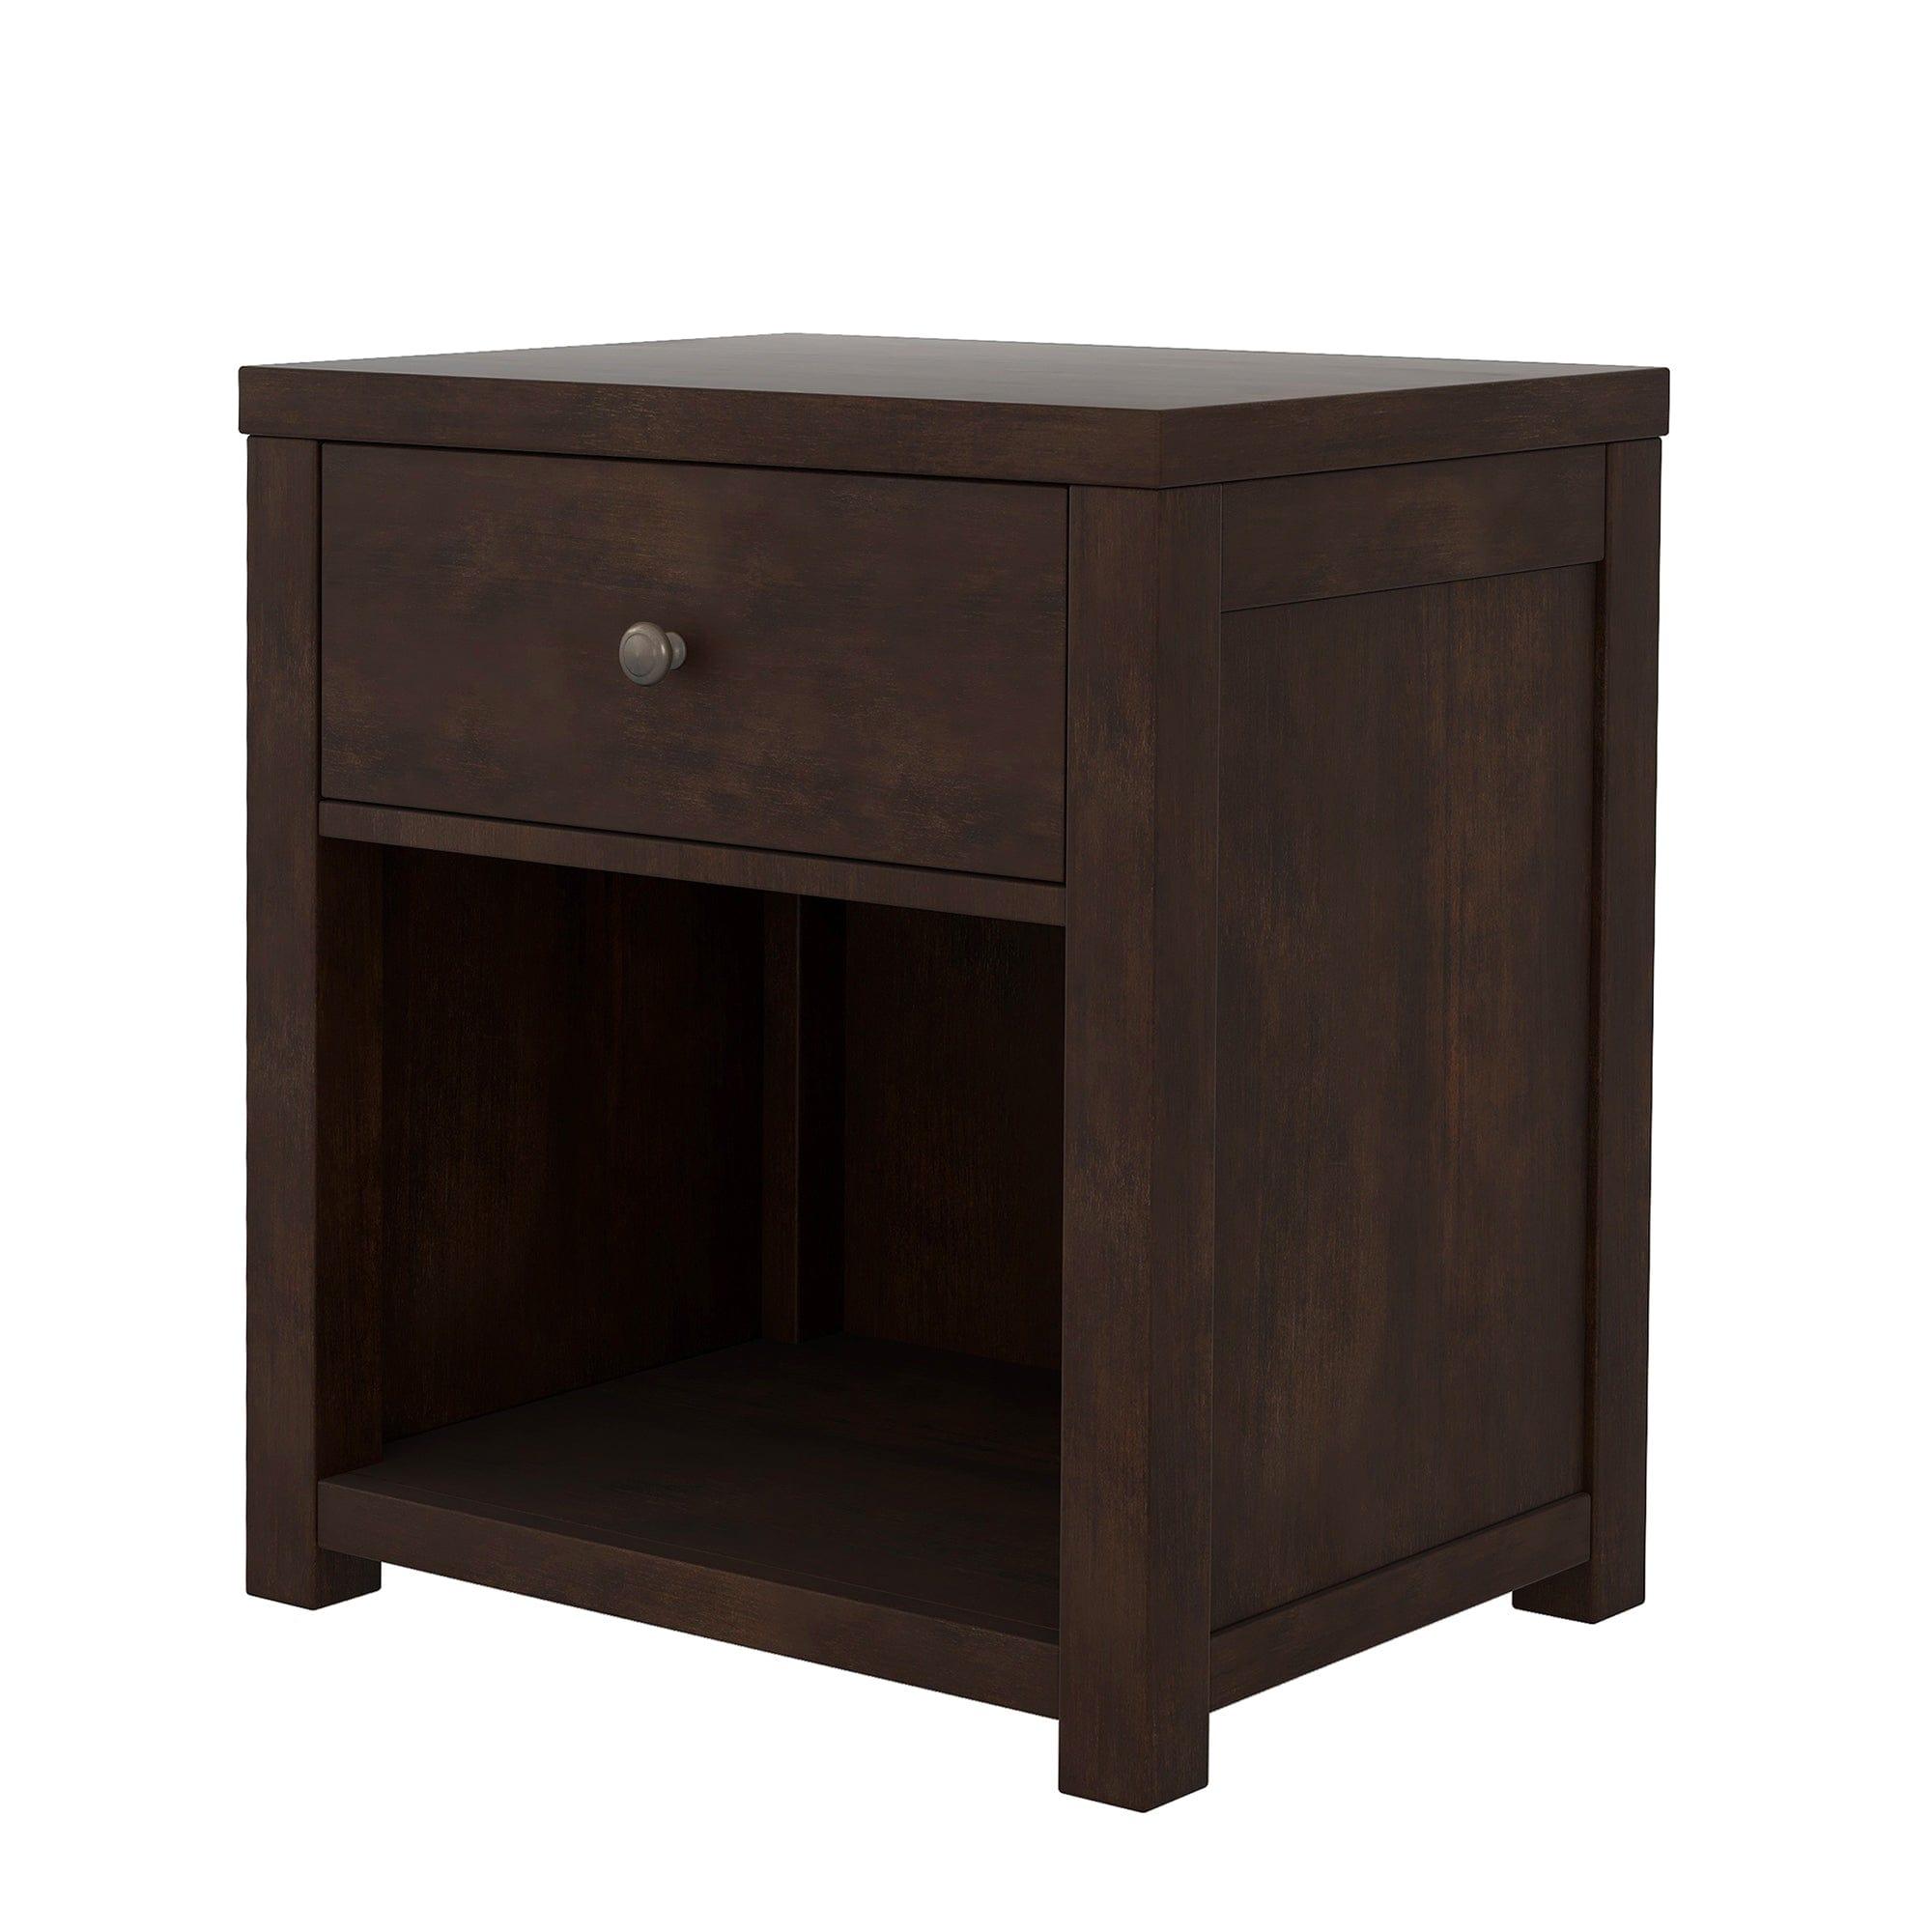 Shop Vintage Aesthetic 1 Drawer Solid Wood Nightstand Sofa End Table in Rich Brown (Nightstand of Freely Configurable Bedroom Sets) Mademoiselle Home Decor